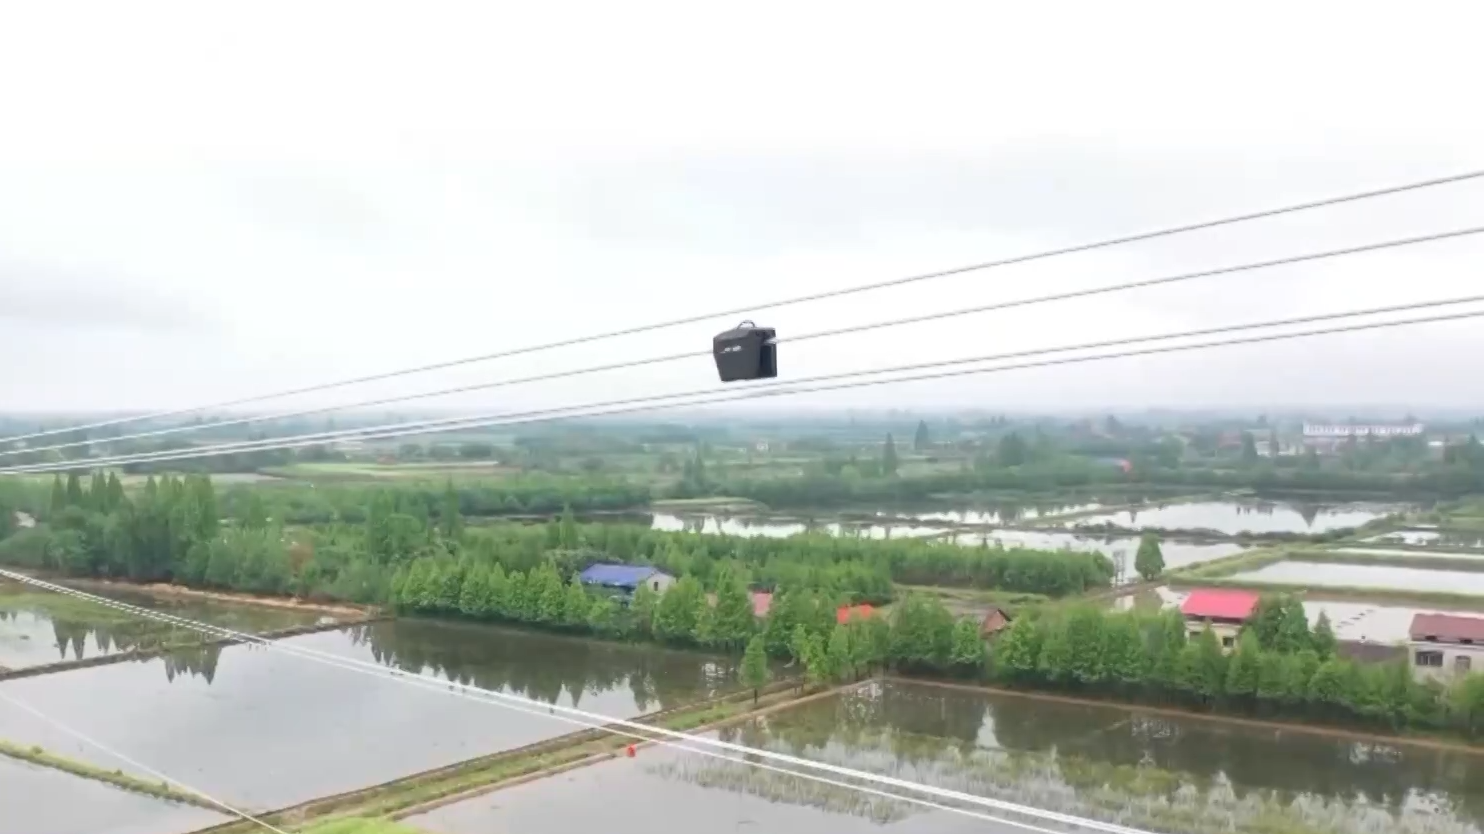 A robot for inspecting of high-voltage power lines works on the transmission line. /CGM